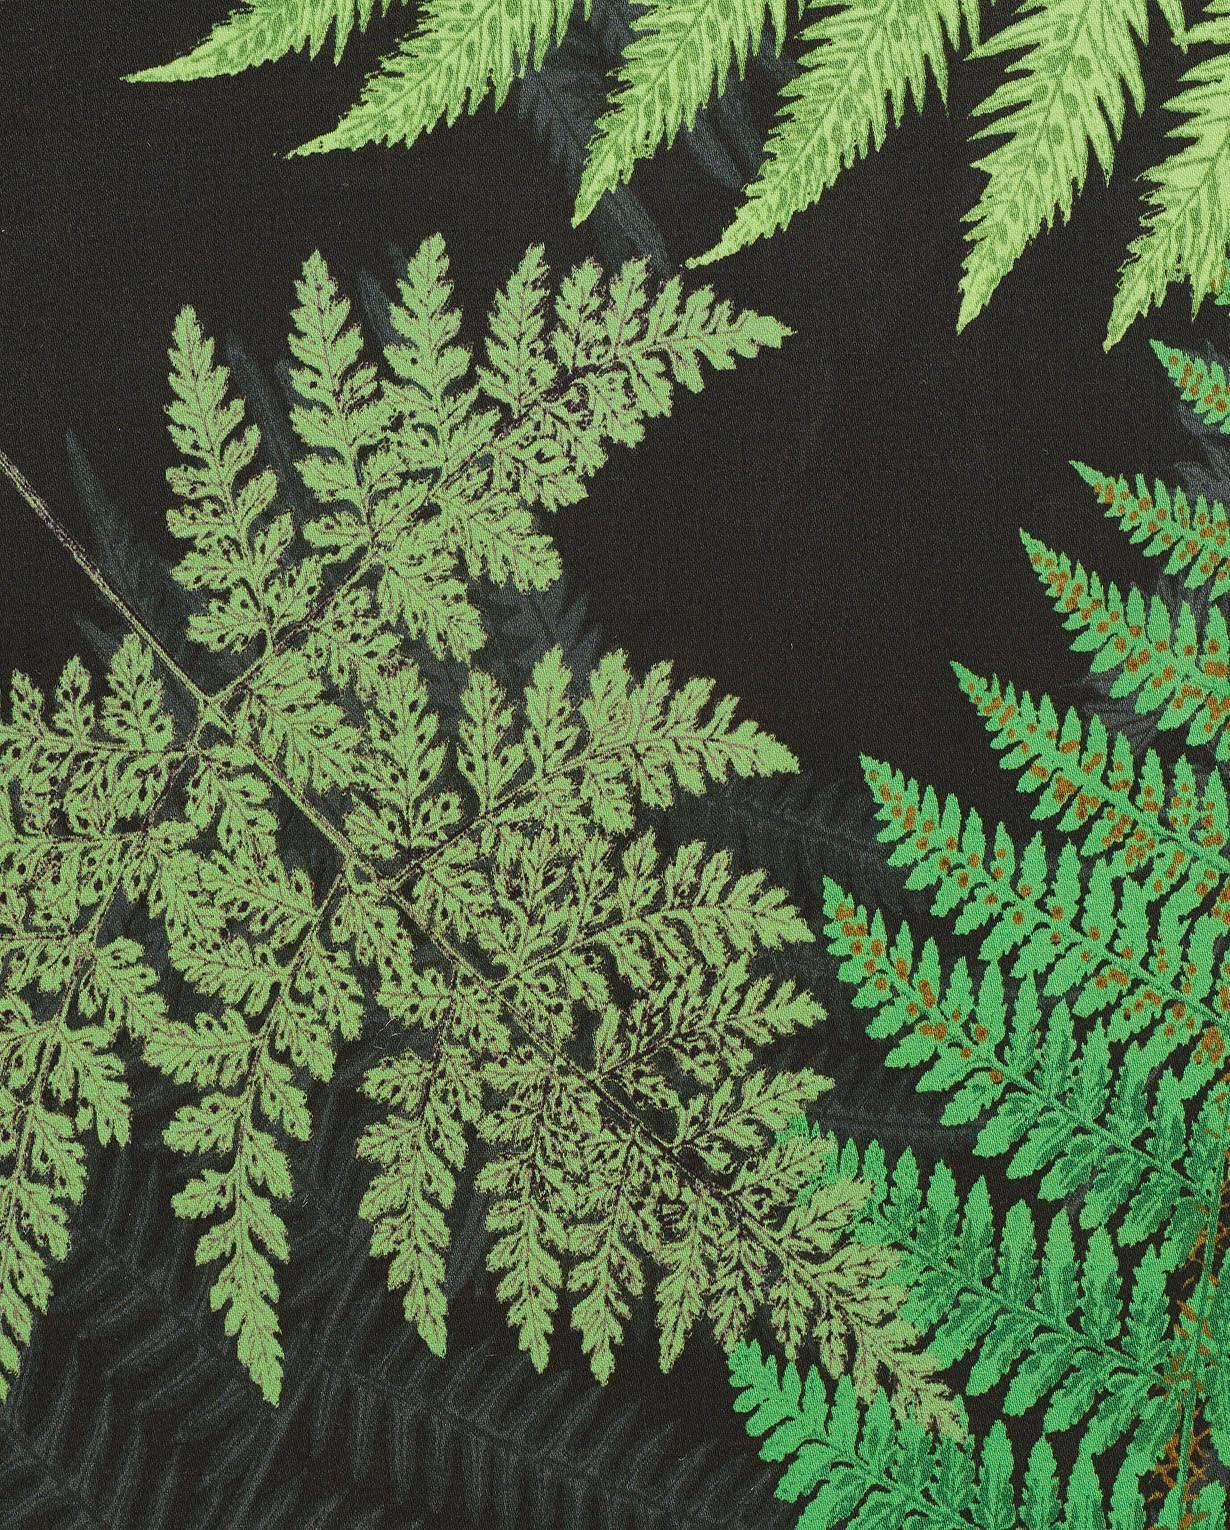 Familar fern fronds get a fashionable update in this extra-large, extra-special pattern. It's an imaginative botanical design with an unusual three-dimensional look. Also a fabric.

Since Schumacher was founded in 1889, our family-owned company